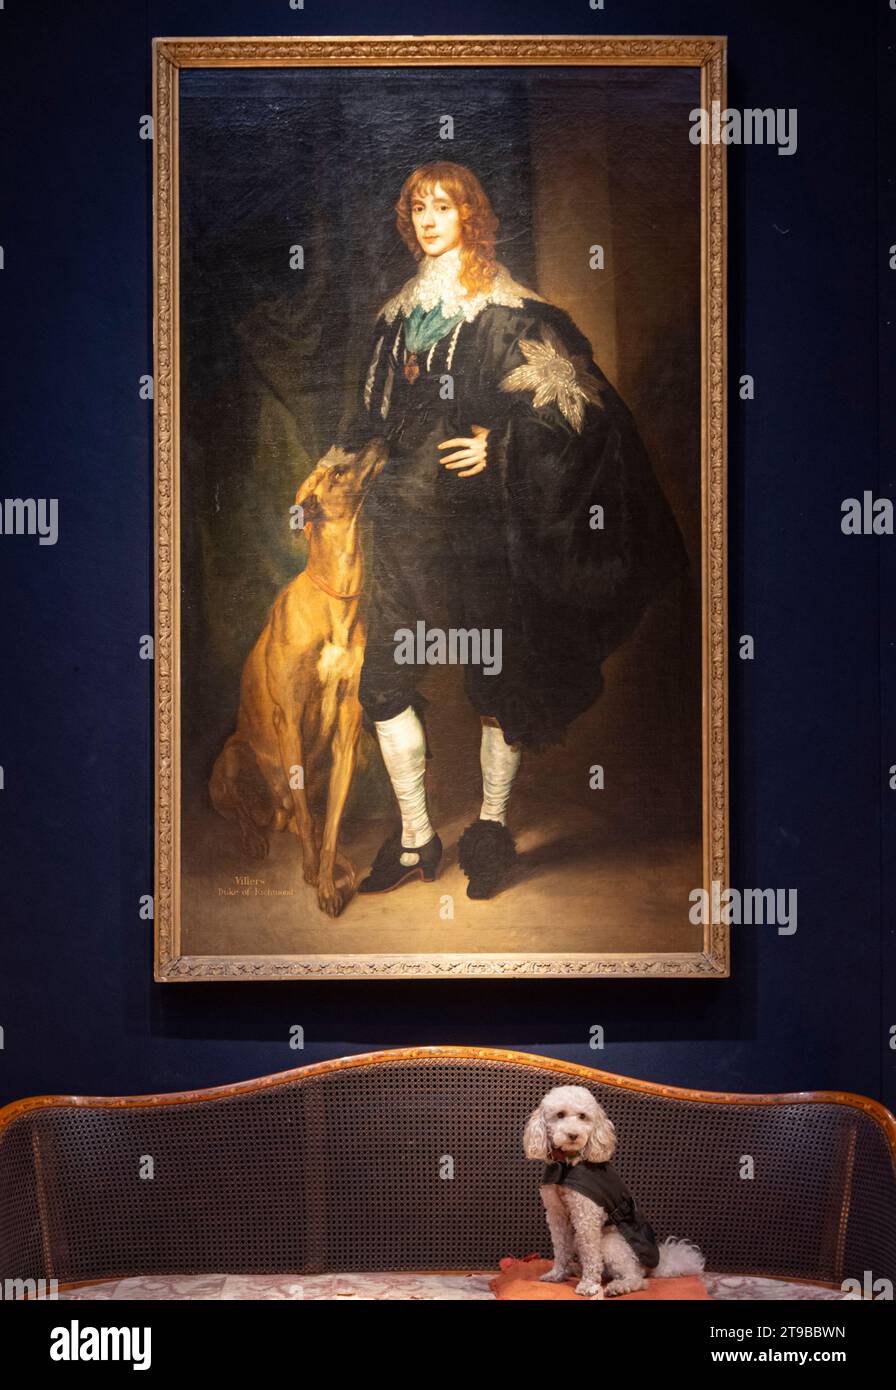 London, UK. 24th Nov, 2023. Christie's unveil the full pre-sale exhibition ahead of the auction of Ombersley Court: The Collection of Lord and Lady Sandys on 29 Nov 2023. Image: Follower of Sir Anthony Van Dyck, Portrait of James Stuart, 4th Duke of Lennox and 1st Duke of Richmond (1612-1655), full-length, wearing the star and Garter of the Order of the Garter, with his hound at his feet. Estimate £5,000-8,000. Credit: Malcolm Park/Alamy Live News Stock Photo